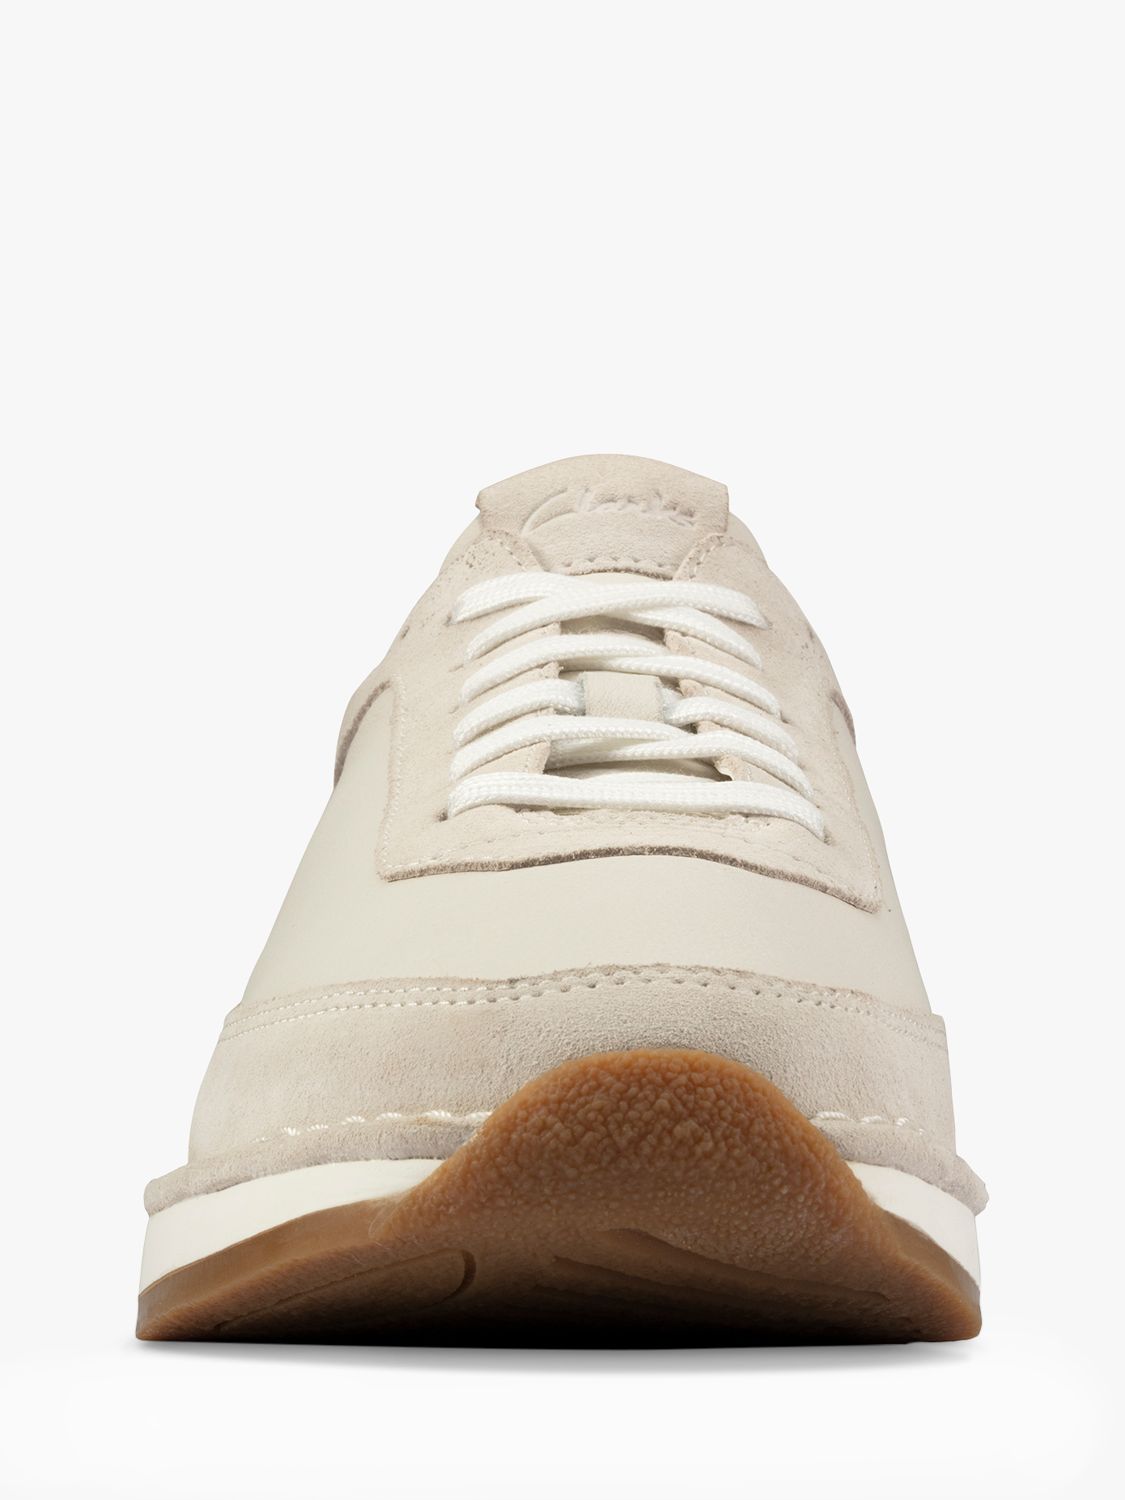 Clarks CraftRun Lace Trainers, White Combi at John Lewis & Partners